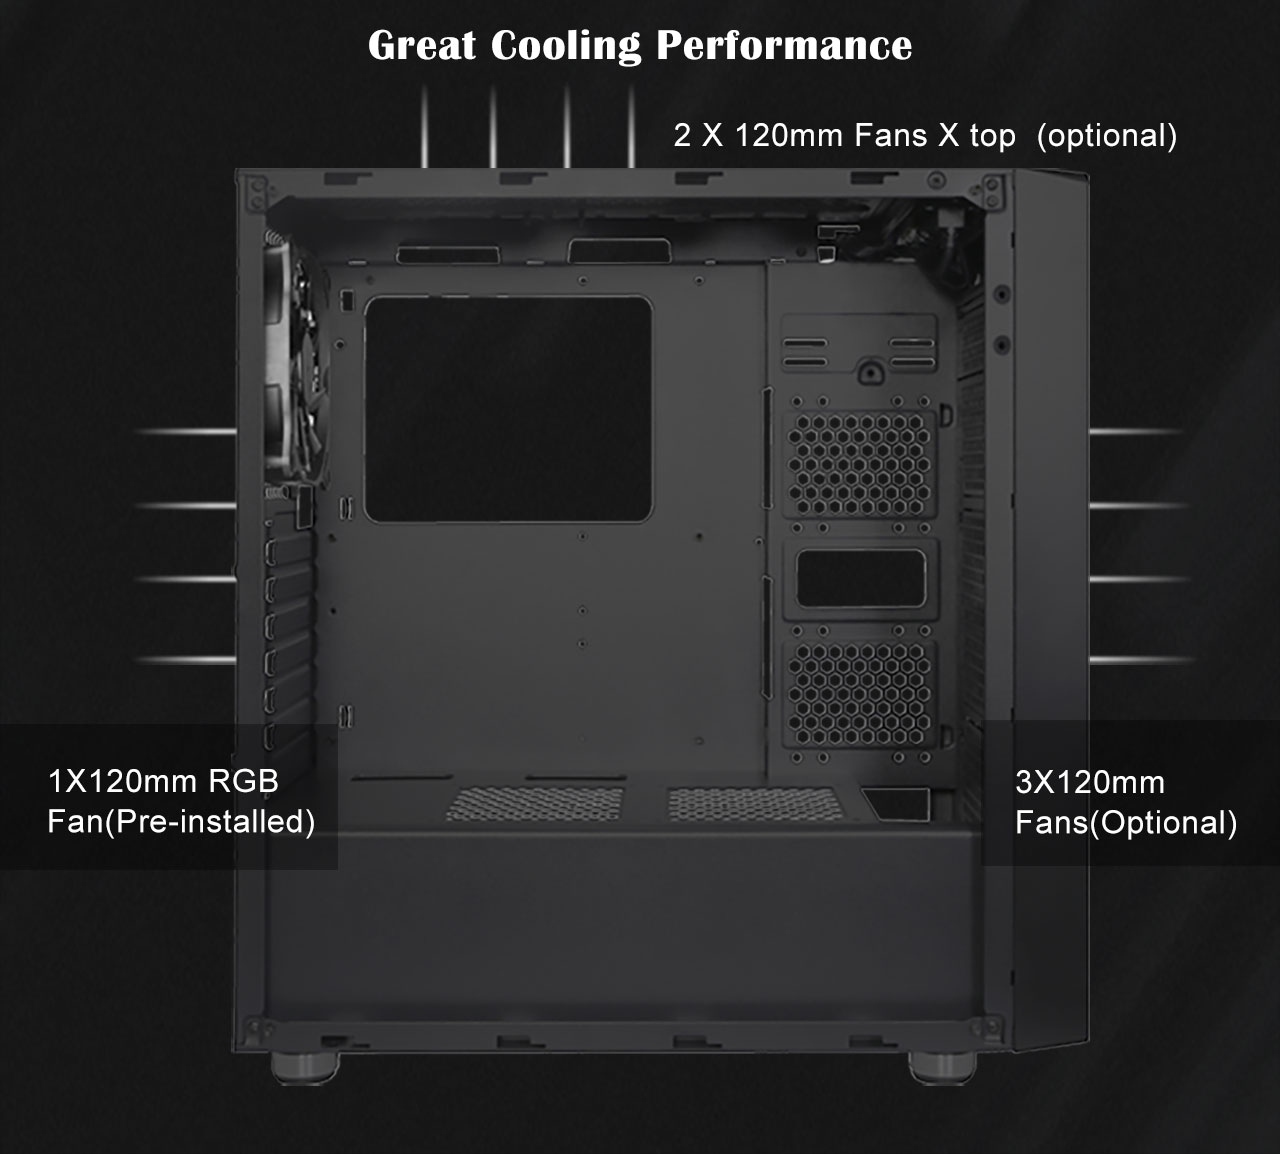 The DIYPC DIY-Line-RGB Case facing to the right with the side panel removed with text above that reads: Great Cooling Performance. Text around the case indicates: Two optional 120mm fans can be installed on top, one 120mm pre-installed fan in the rear and three optional 120mm fans in front